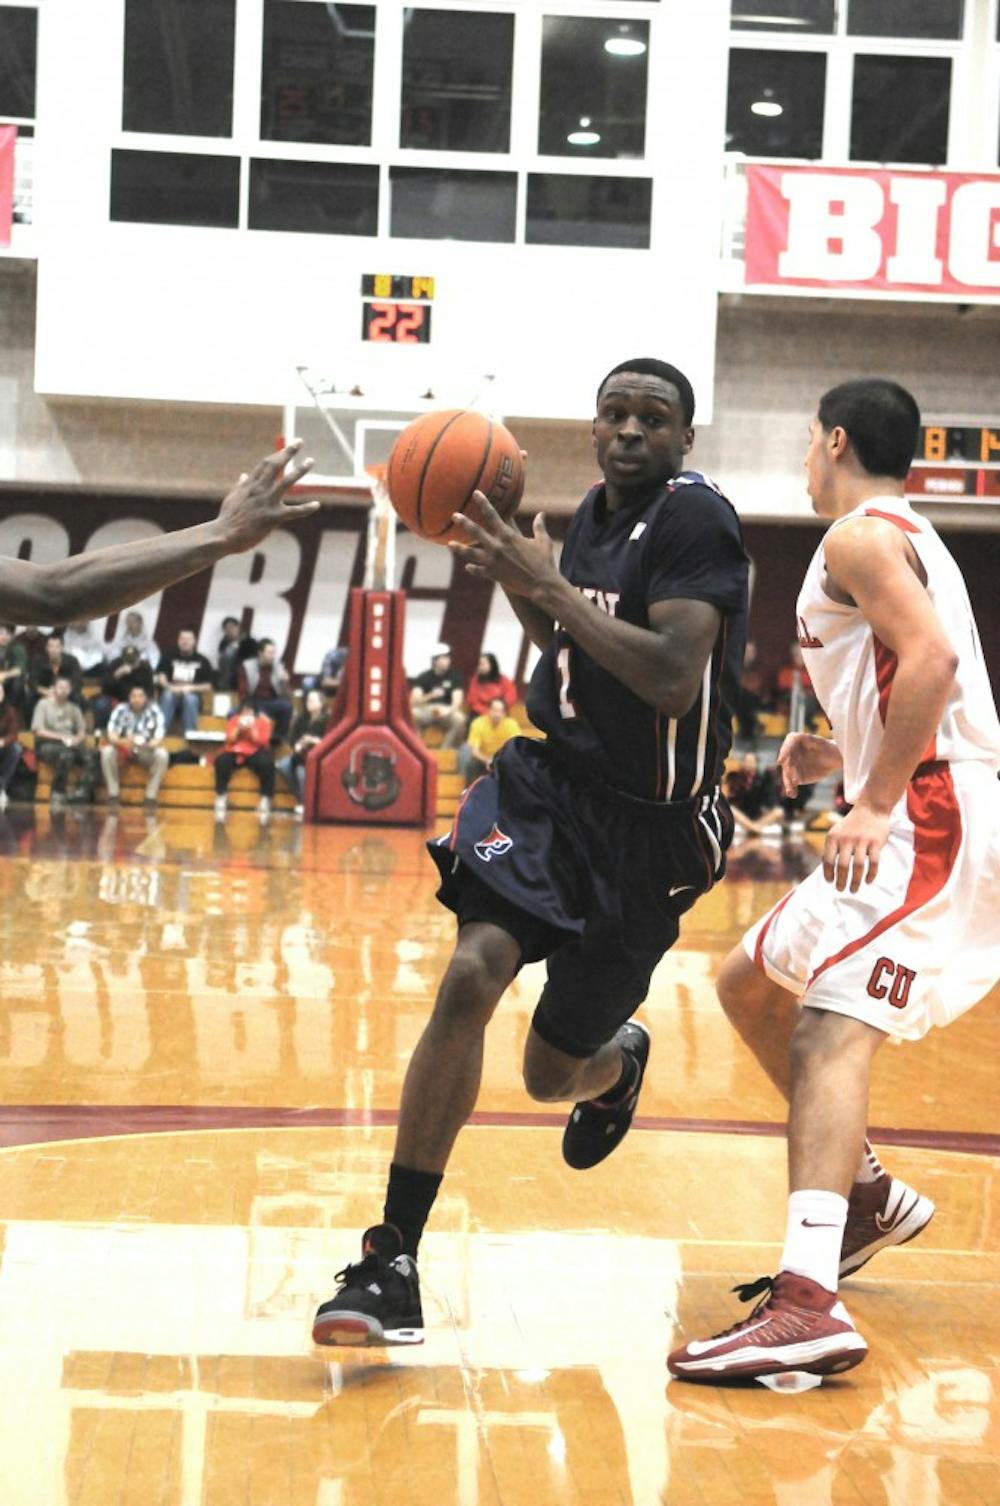 	Last weekend, freshman guard Tony Hicks found the hoop seemingly with ease, burning the Big Red and the Lions for 48 points over the two games.